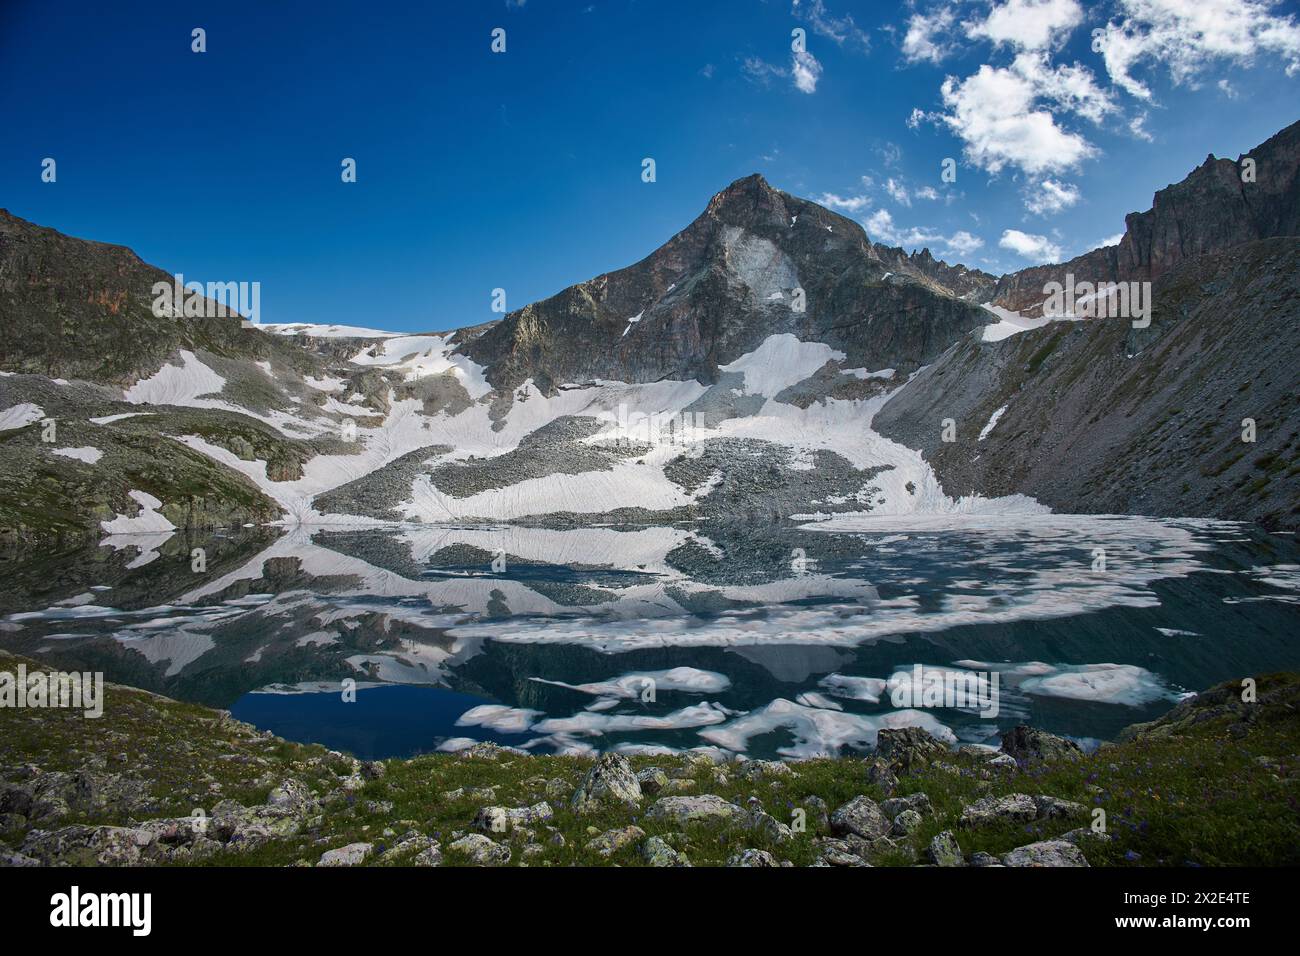 Lake sits nestled amidst snow covered mountains under a clear blue sky Stock Photo